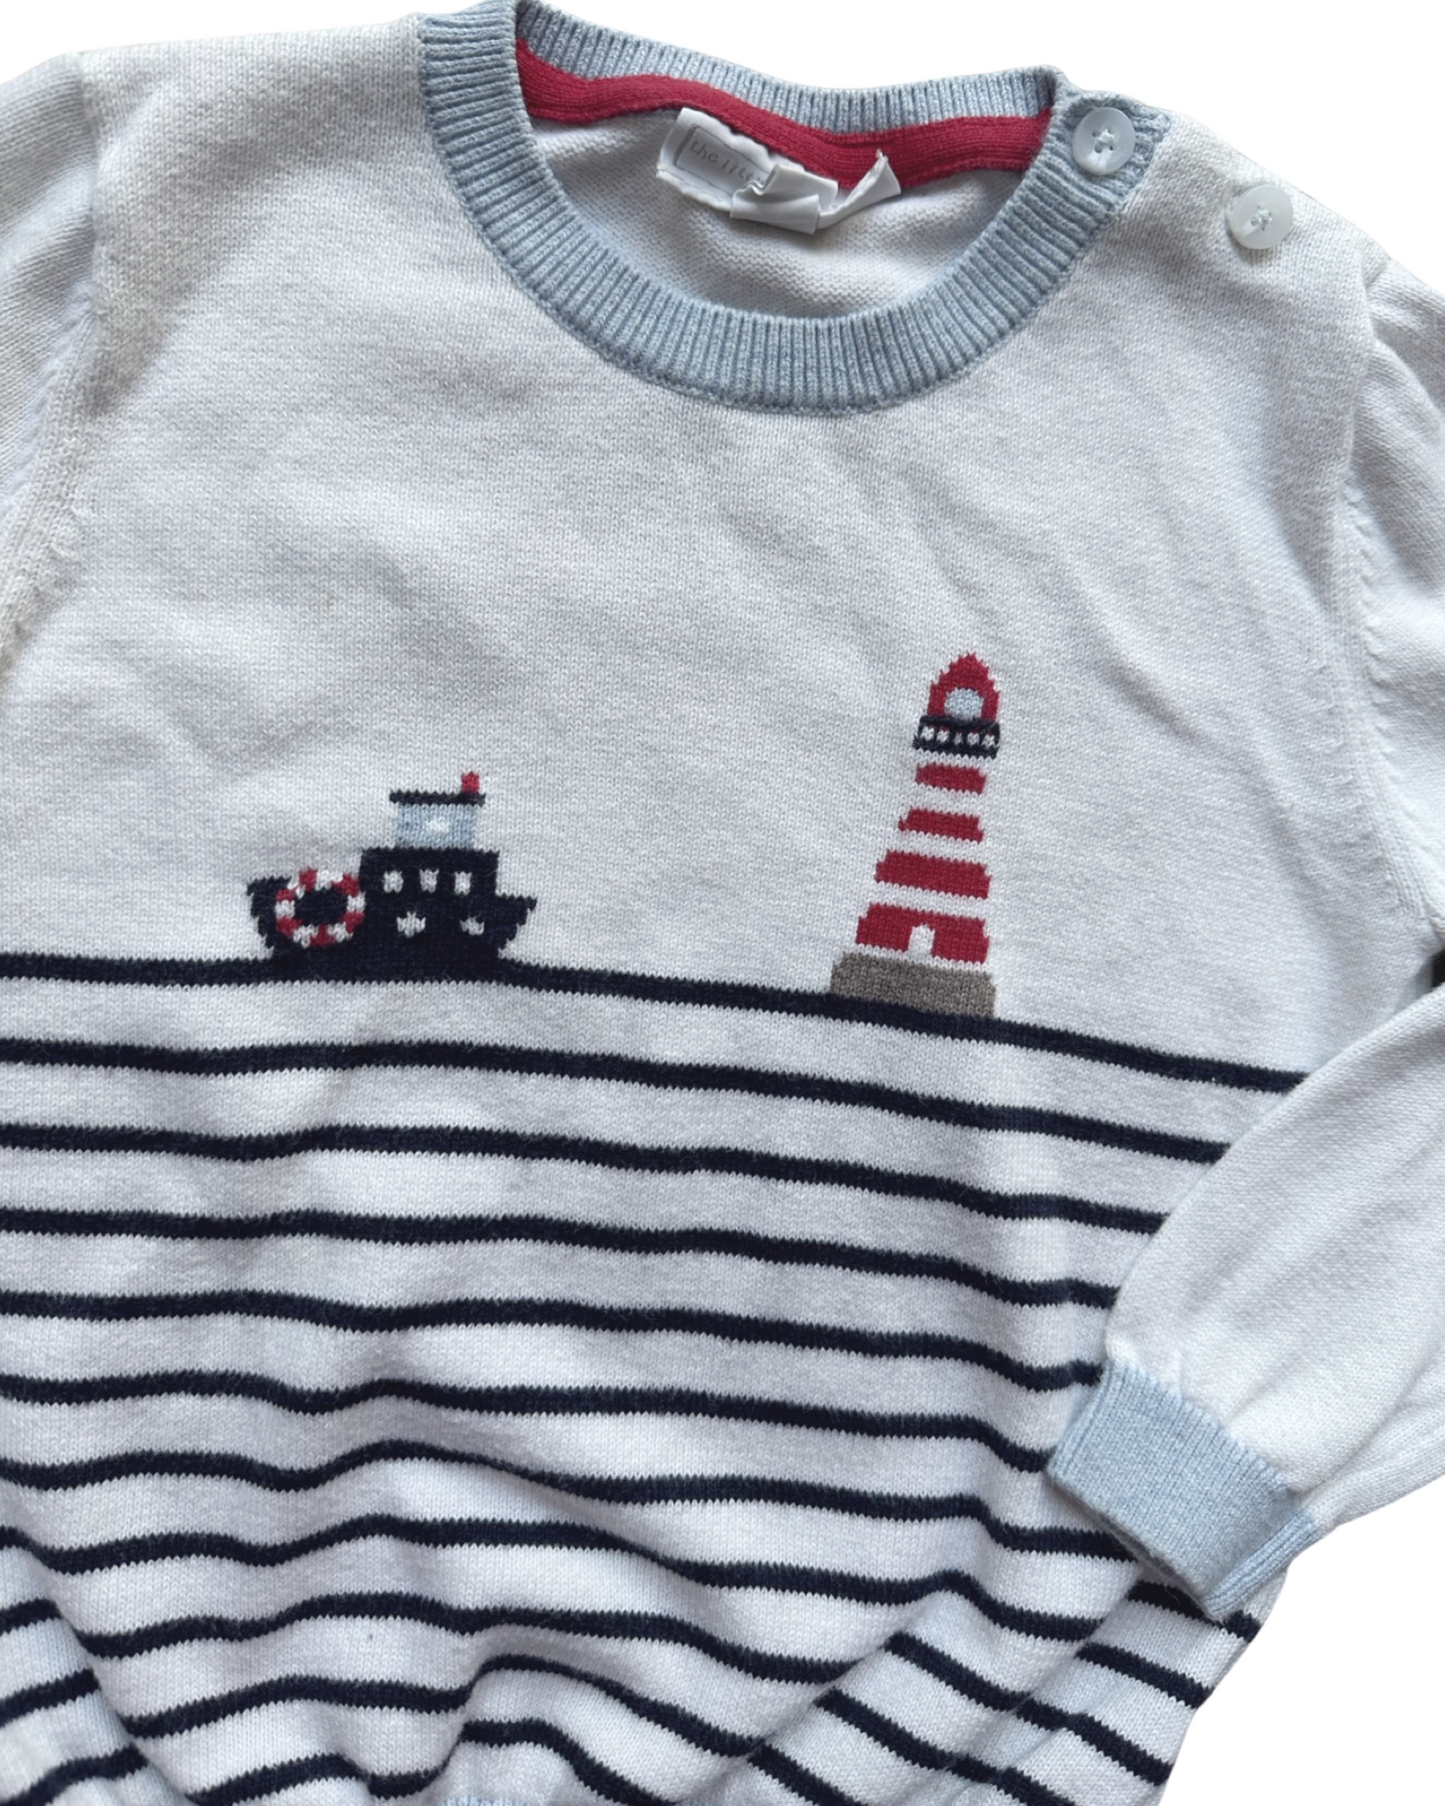 The Little White Company lighthouse jumper (size 12-18mths)